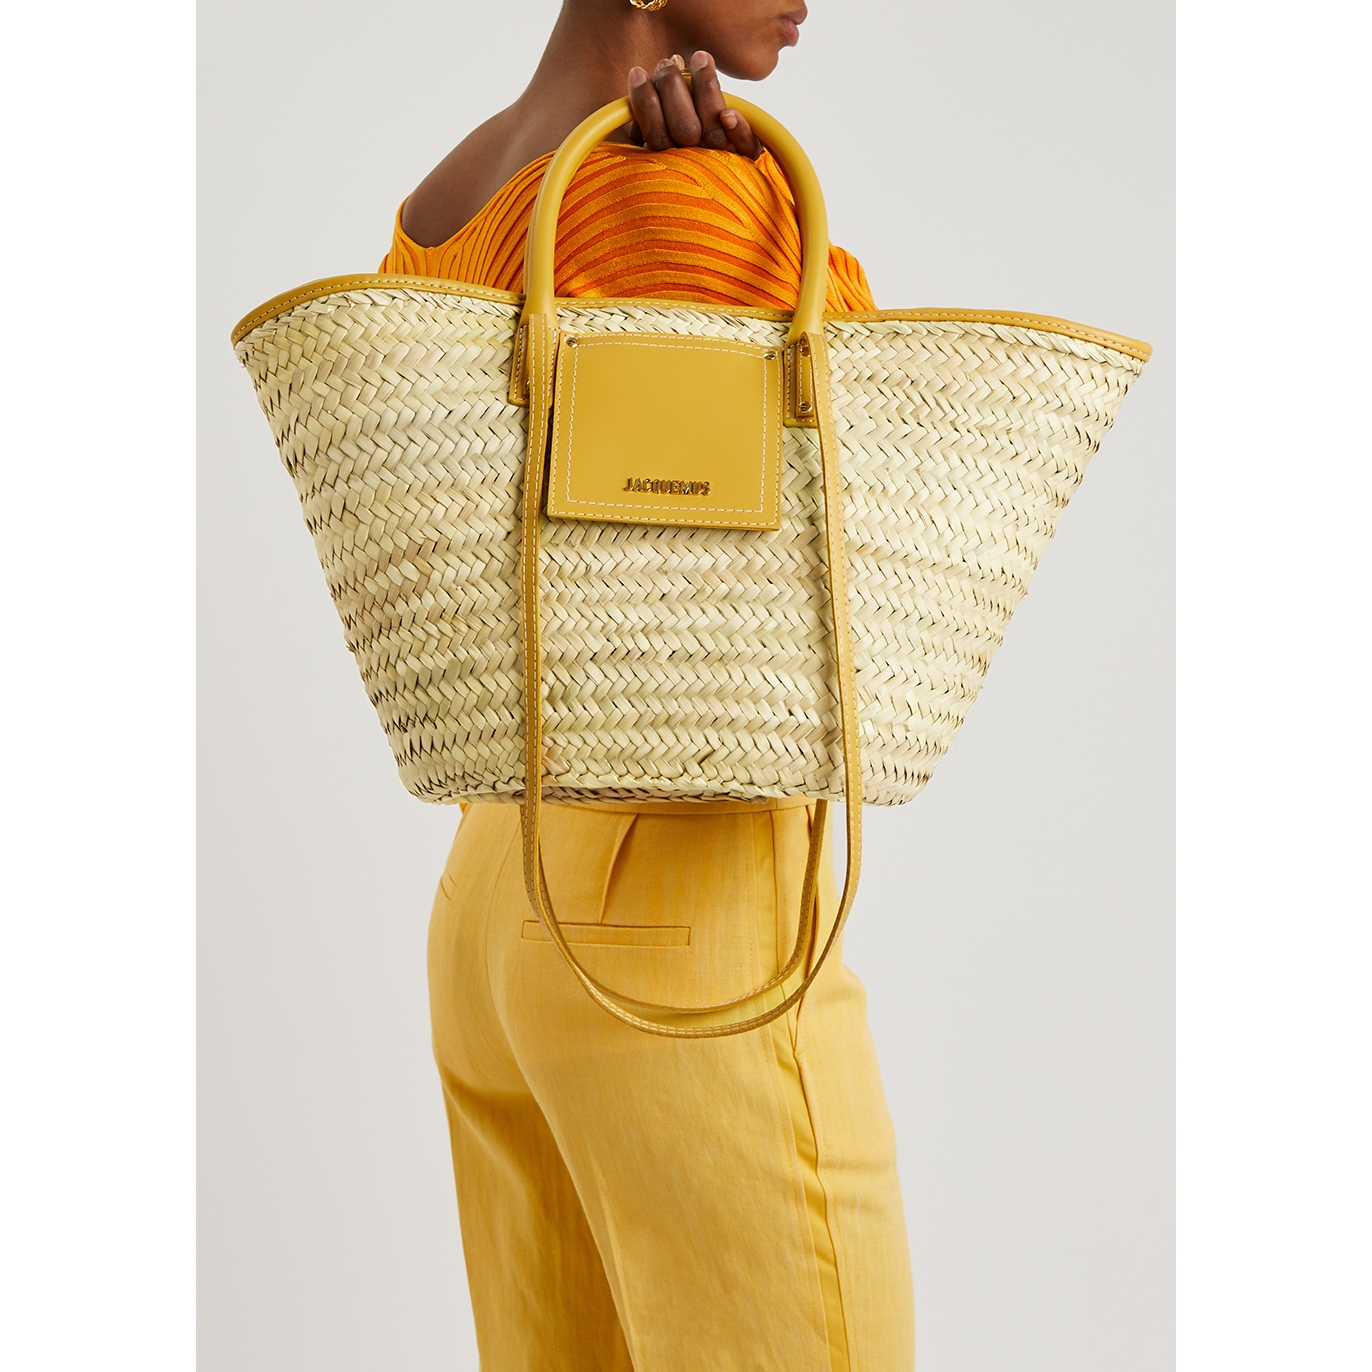 Jacquemus Le Panier Soli Tote Bag - Yellow - One Size